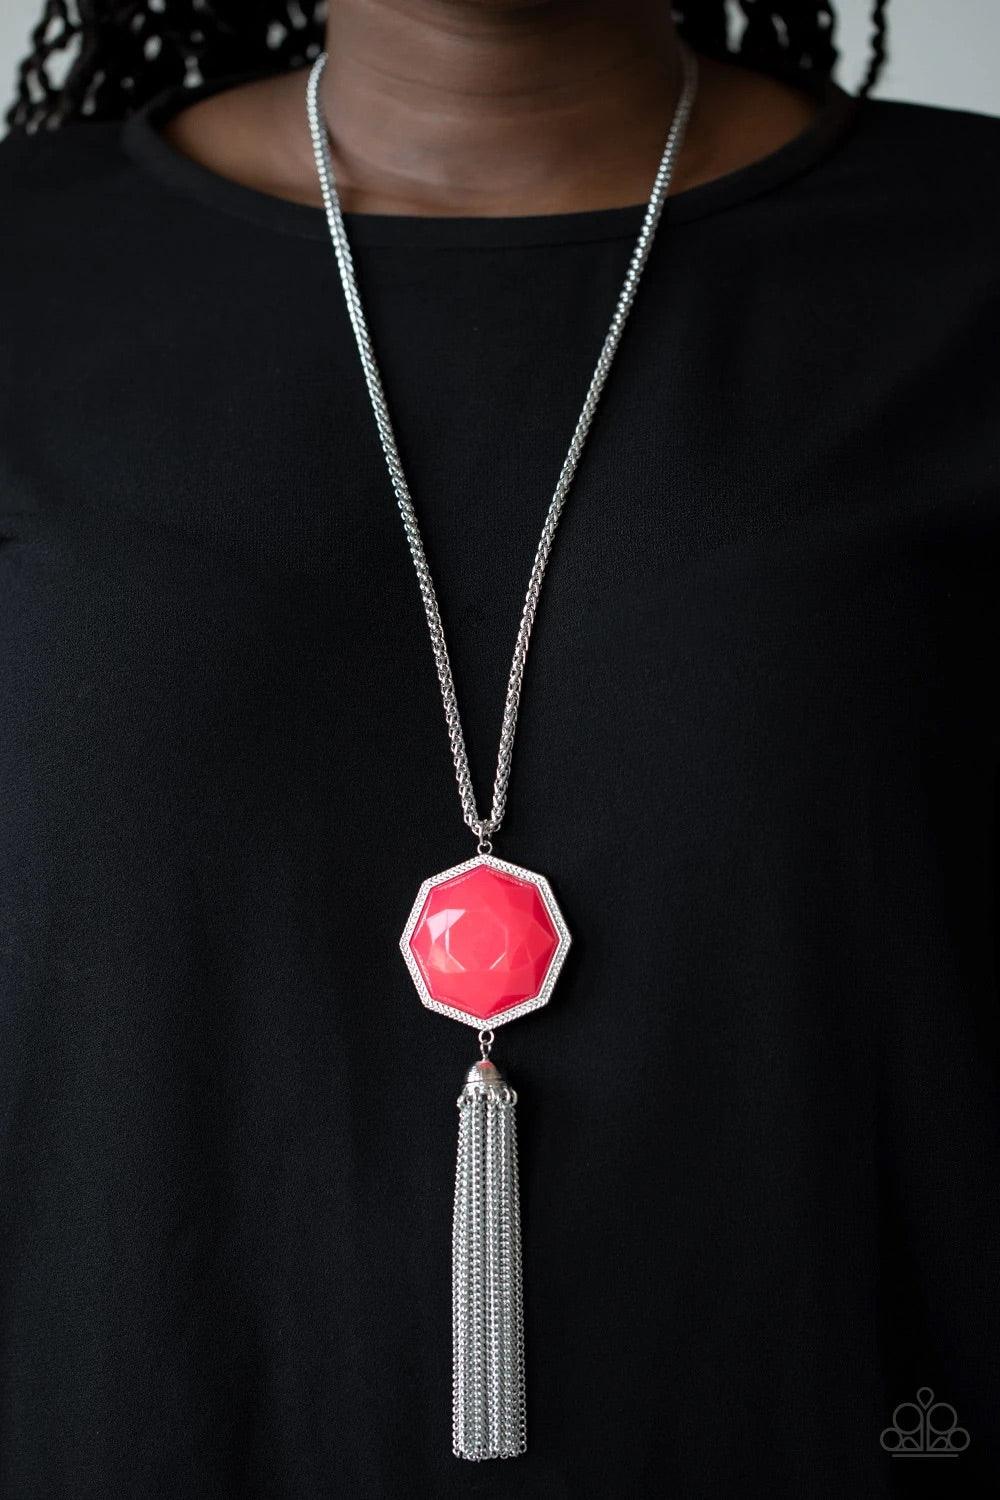 Paparazzi Accessories Prismatically Polygon - Pink Featuring a faceted surface, a neon pink bead is pressed into the center of a decorative silver polygon frame at the bottom of an ornate silver chain. Capped in a silver bead, shimmery silver chains strea